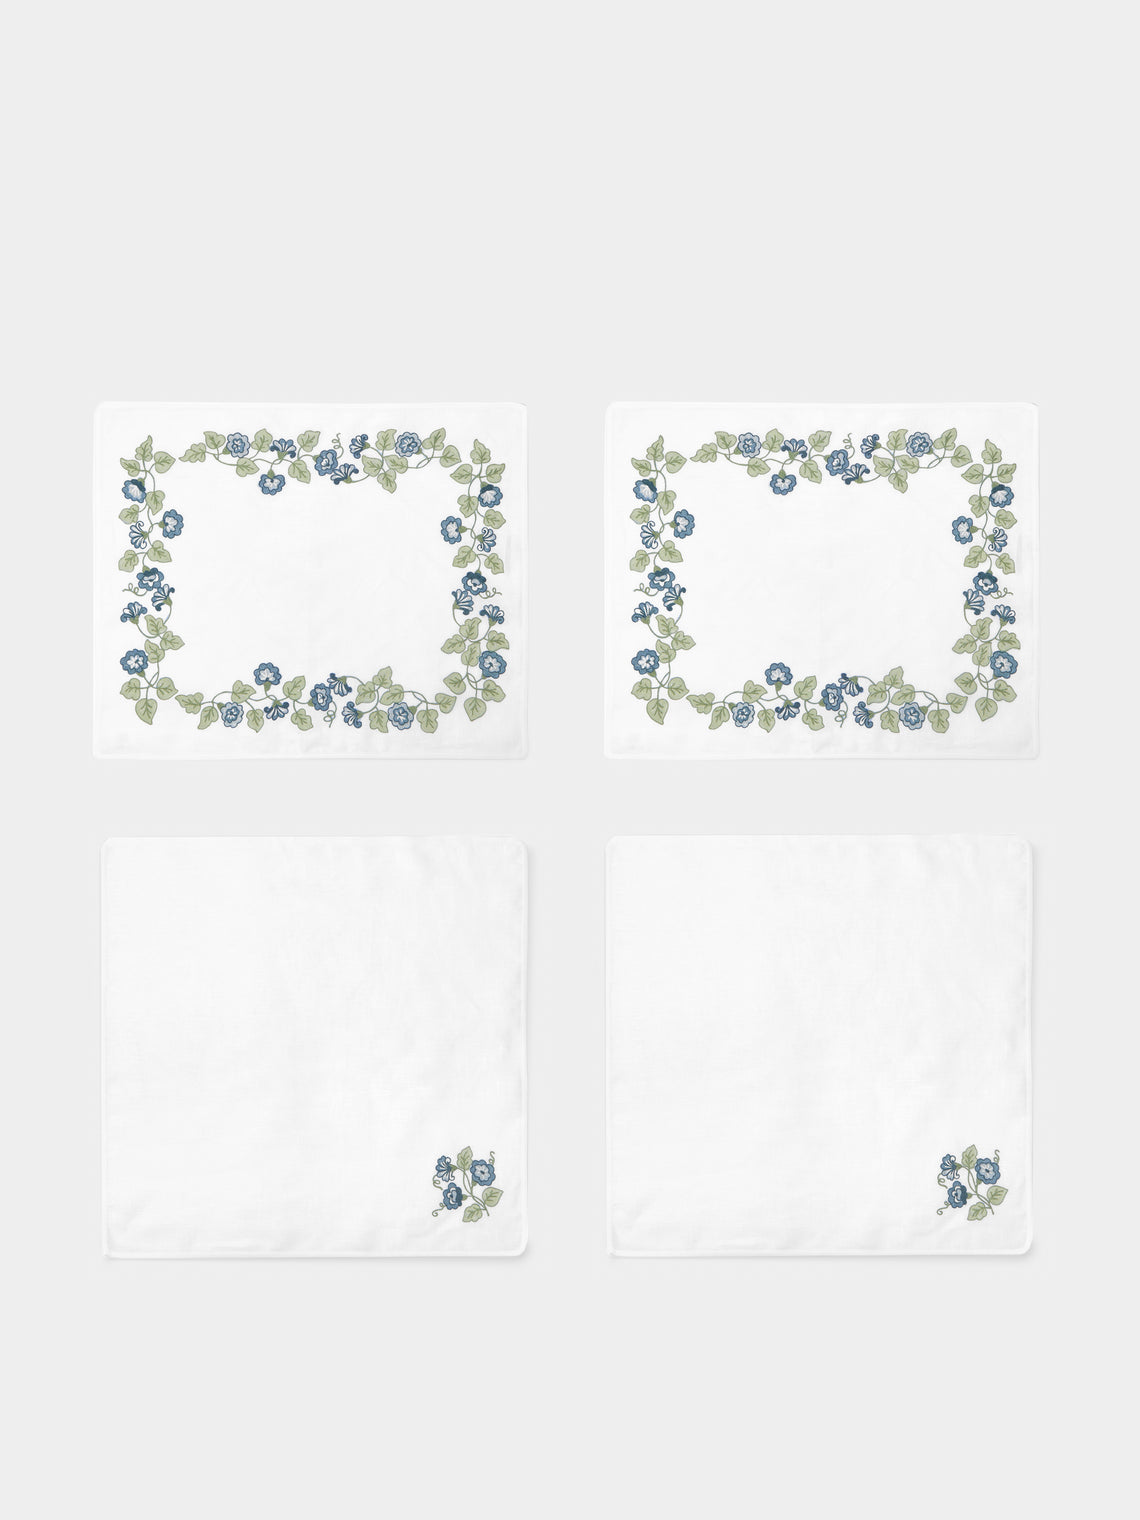 Loretta Caponi - Morning Glory Hand-Embroidered Linen Placemats and Napkins (Set of 2) - White - ABASK - 